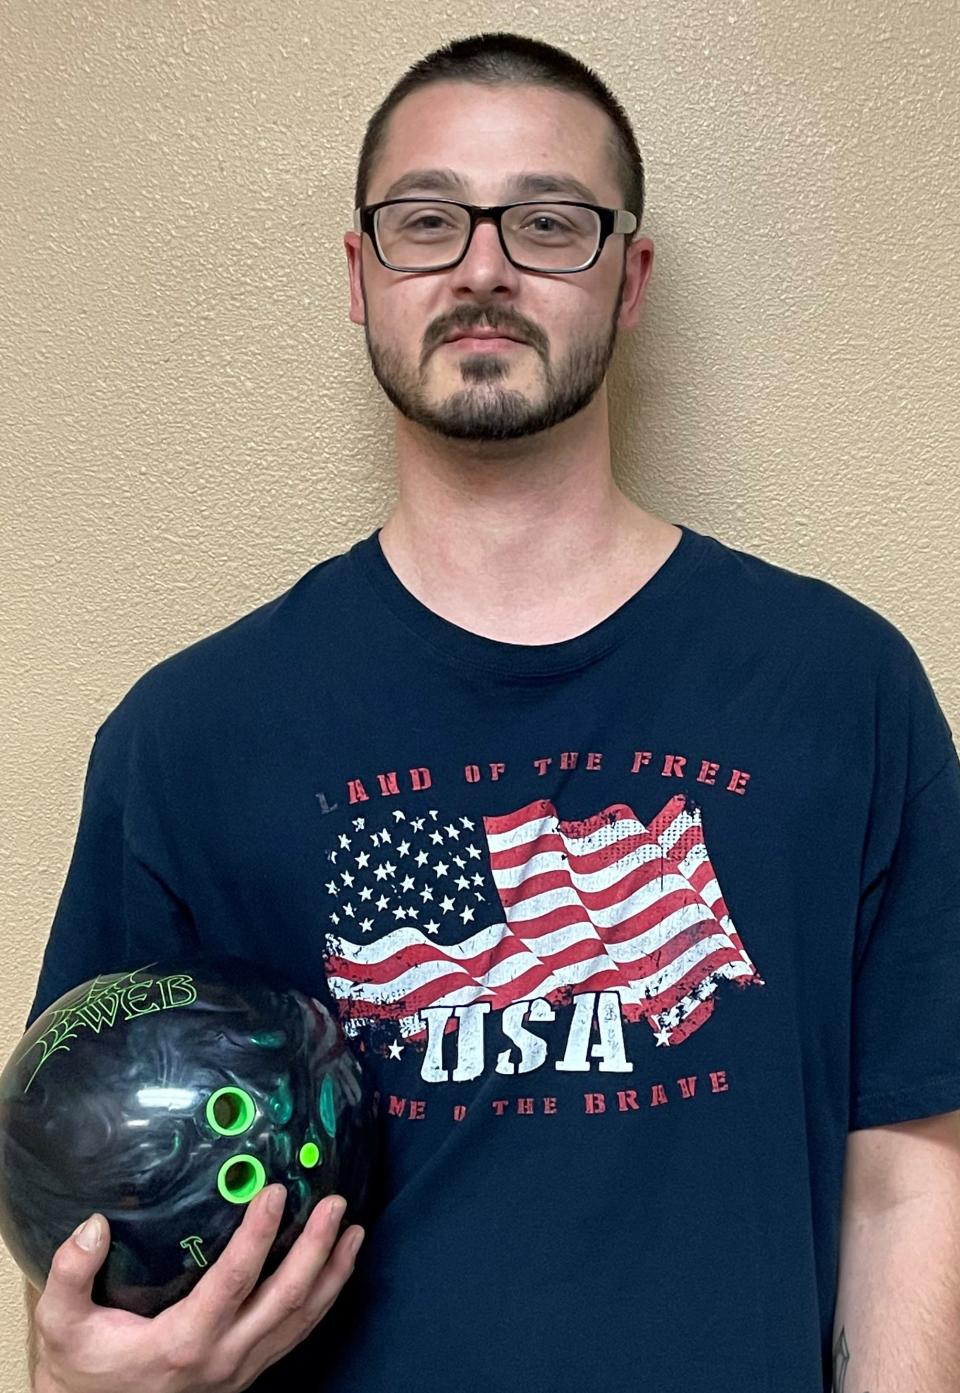 Joseph Graham is having staggering success for a bowler in his first year of bowling which includes a pair of 700 scores. His 742 and 734 series from last week included a total of 50 strikes and a 246 average over the six games.